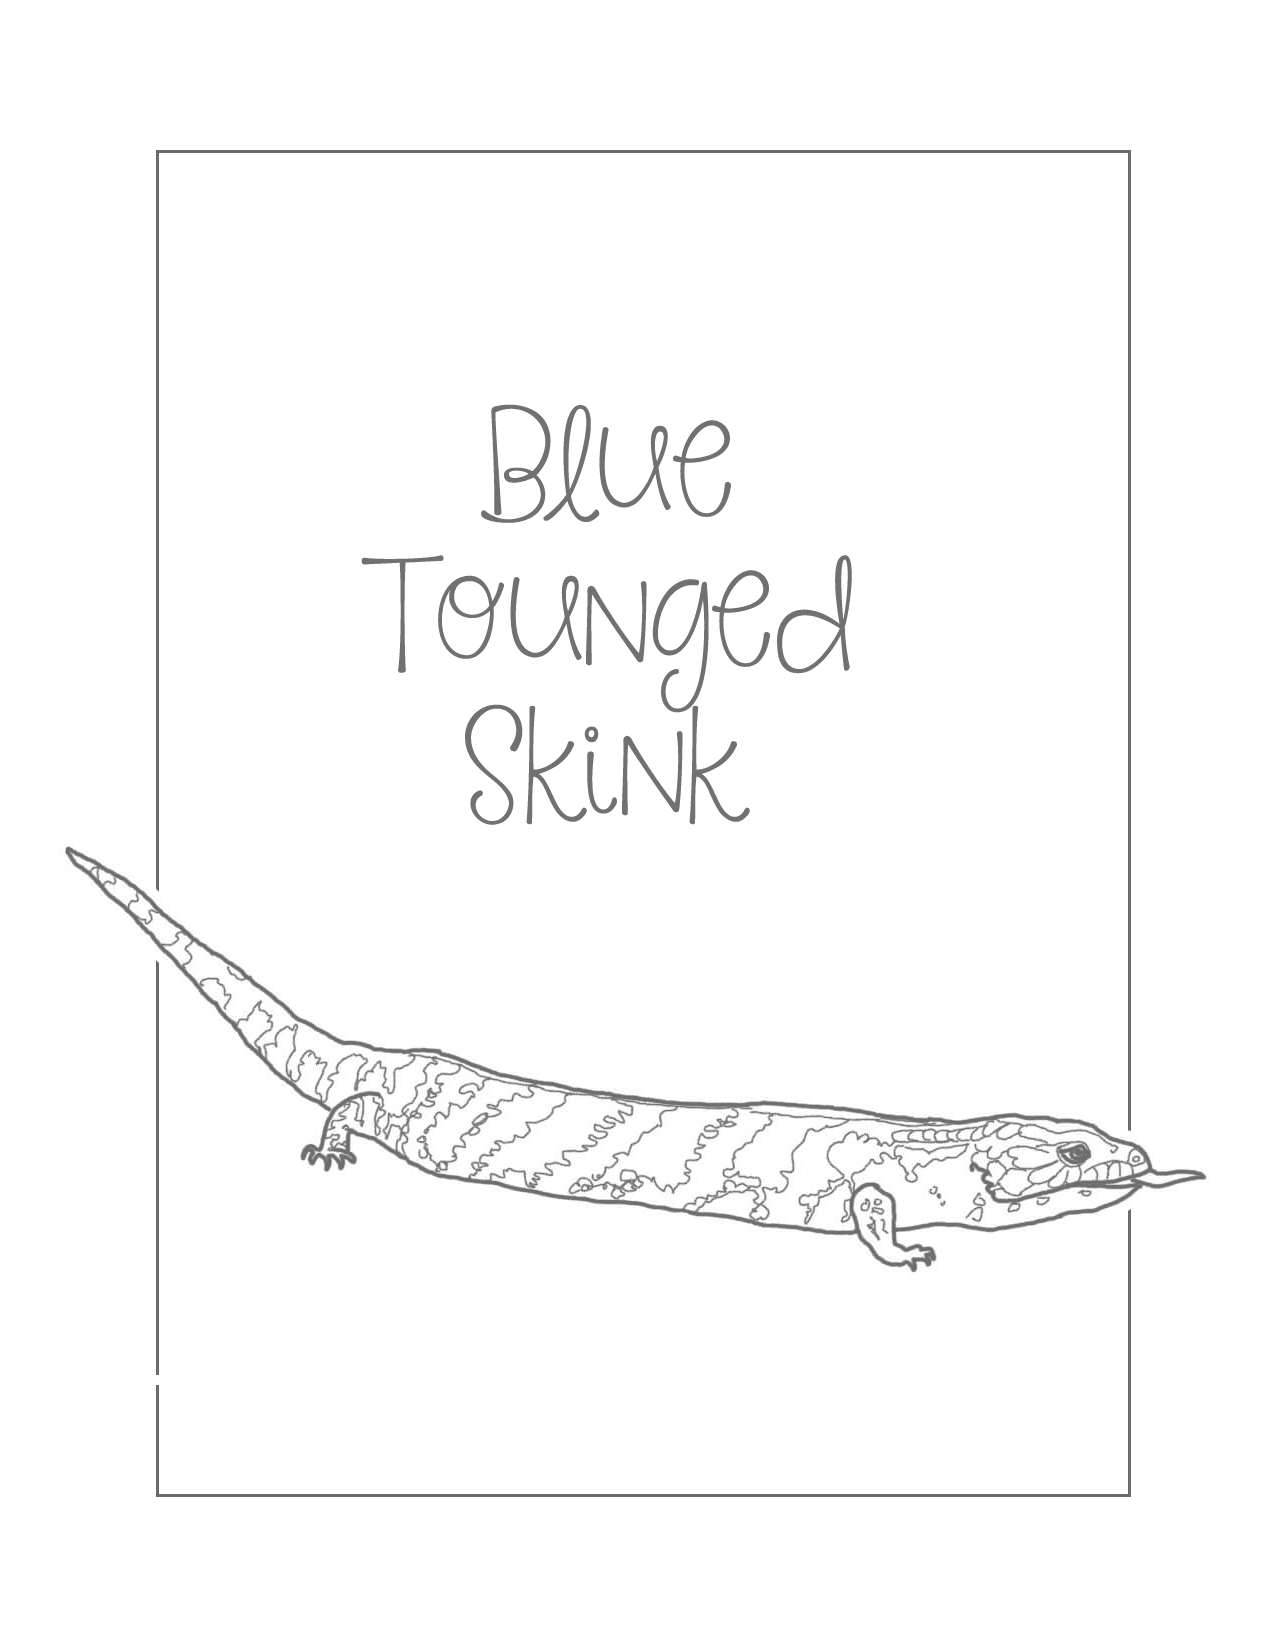 Blue Tounged Skink Lizard Traceable Coloring Page